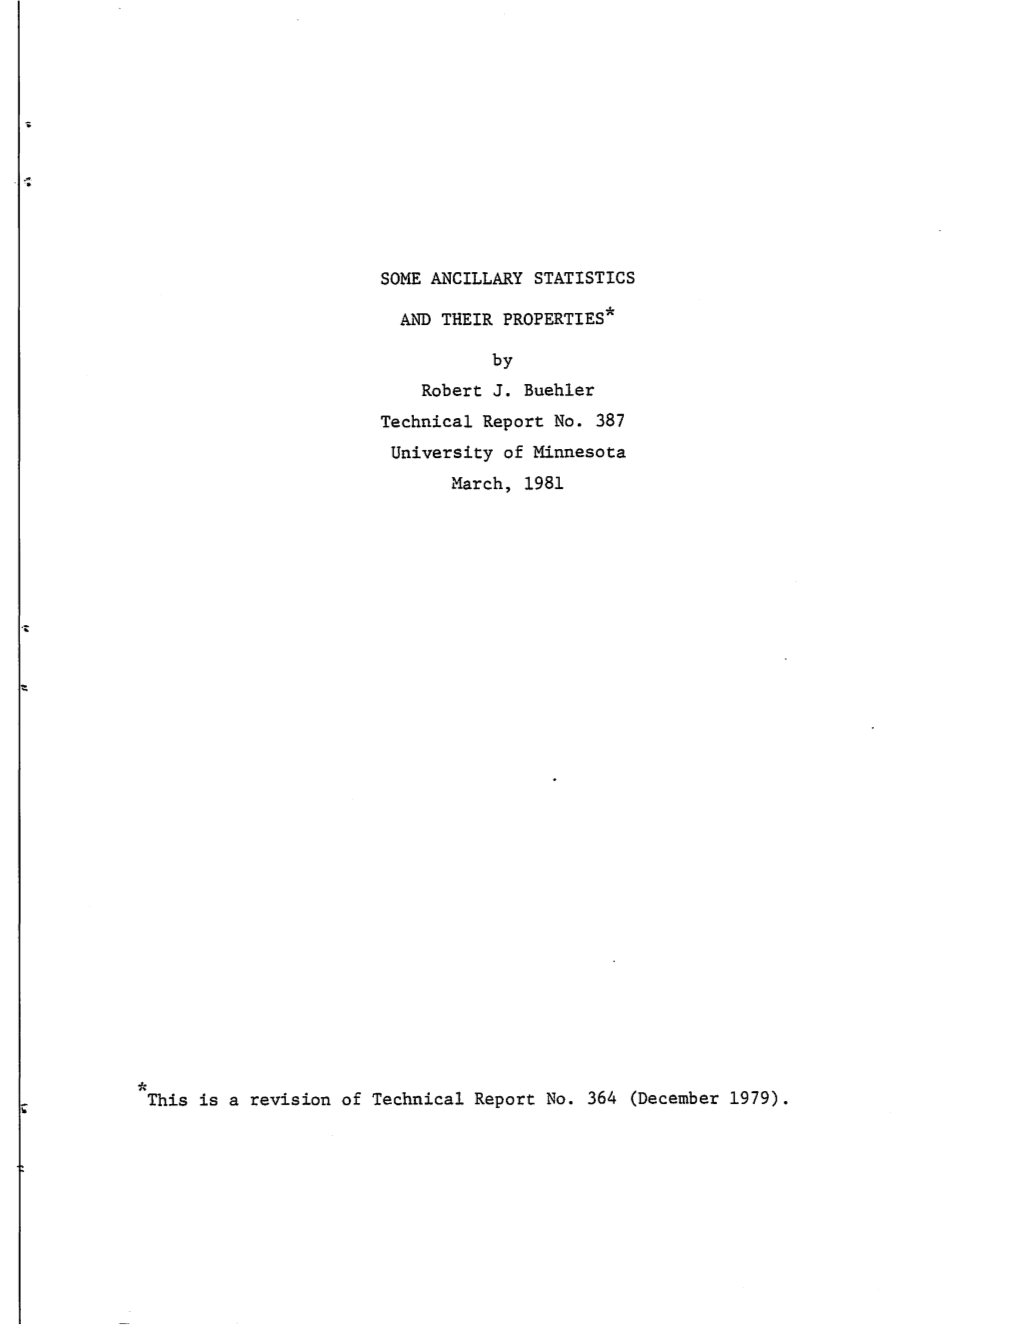 SOME ANCILLARY STATISTICS and THEIR PROPERTIES* by Robert J. Buehler Technical Report No. 387 University of Minnesota March